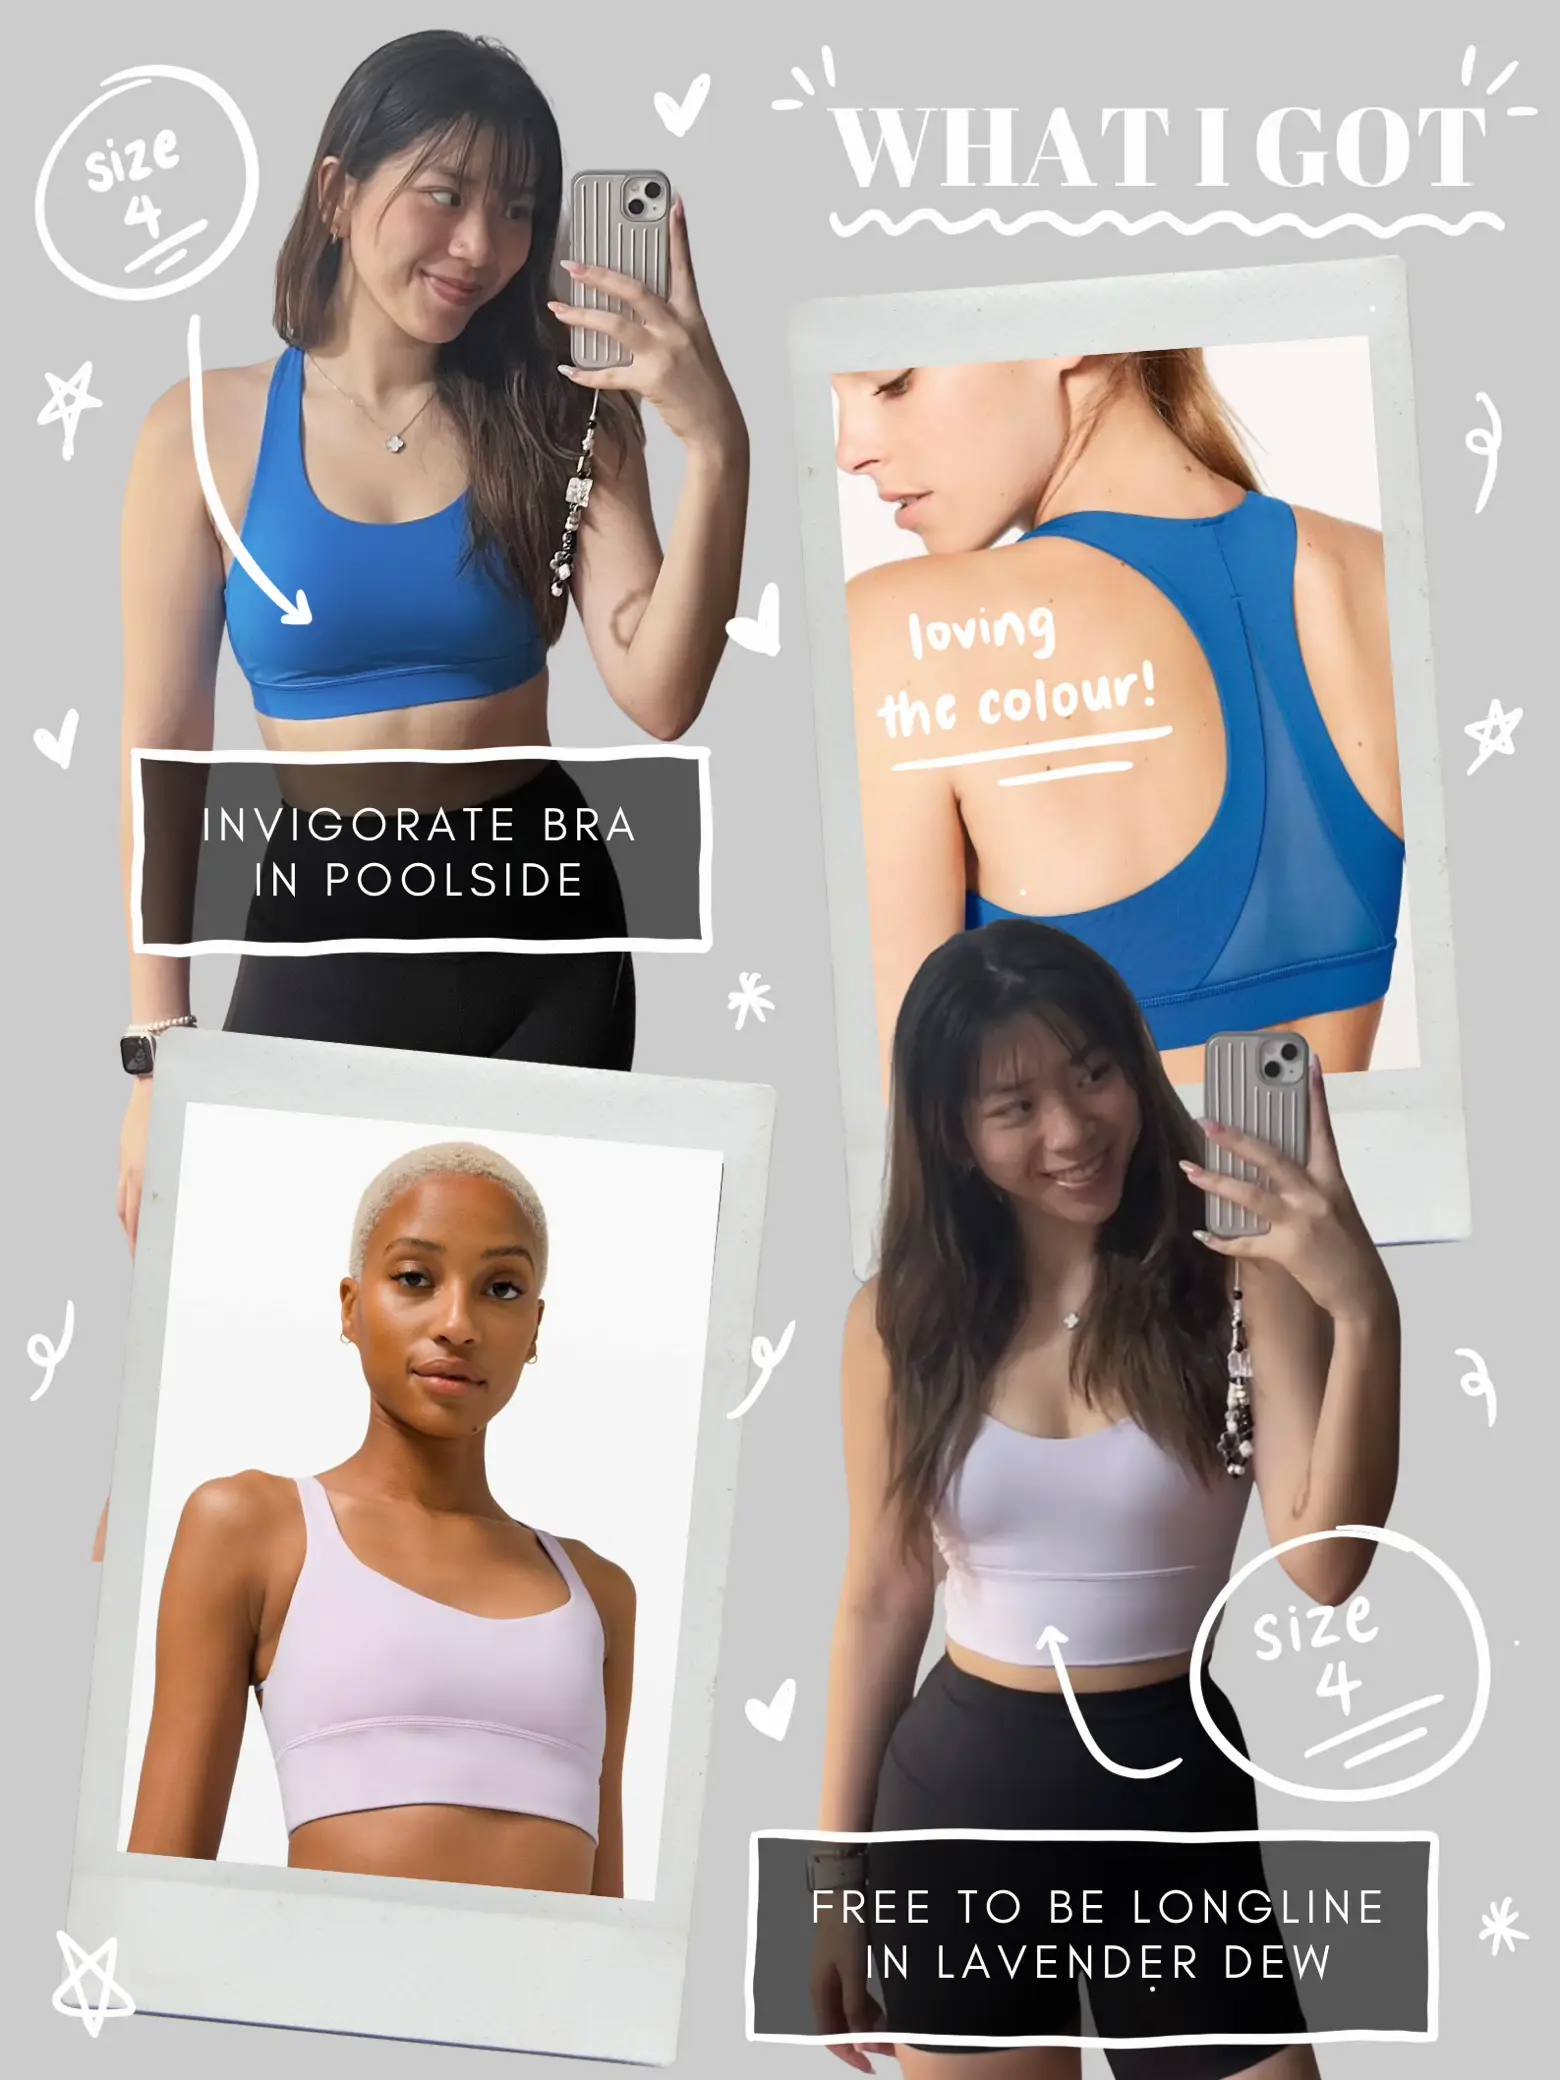 run to LULULEMON OUTLET in JB! 💸 DISCOUNTED HAUL ❤️, Gallery posted by  shanice